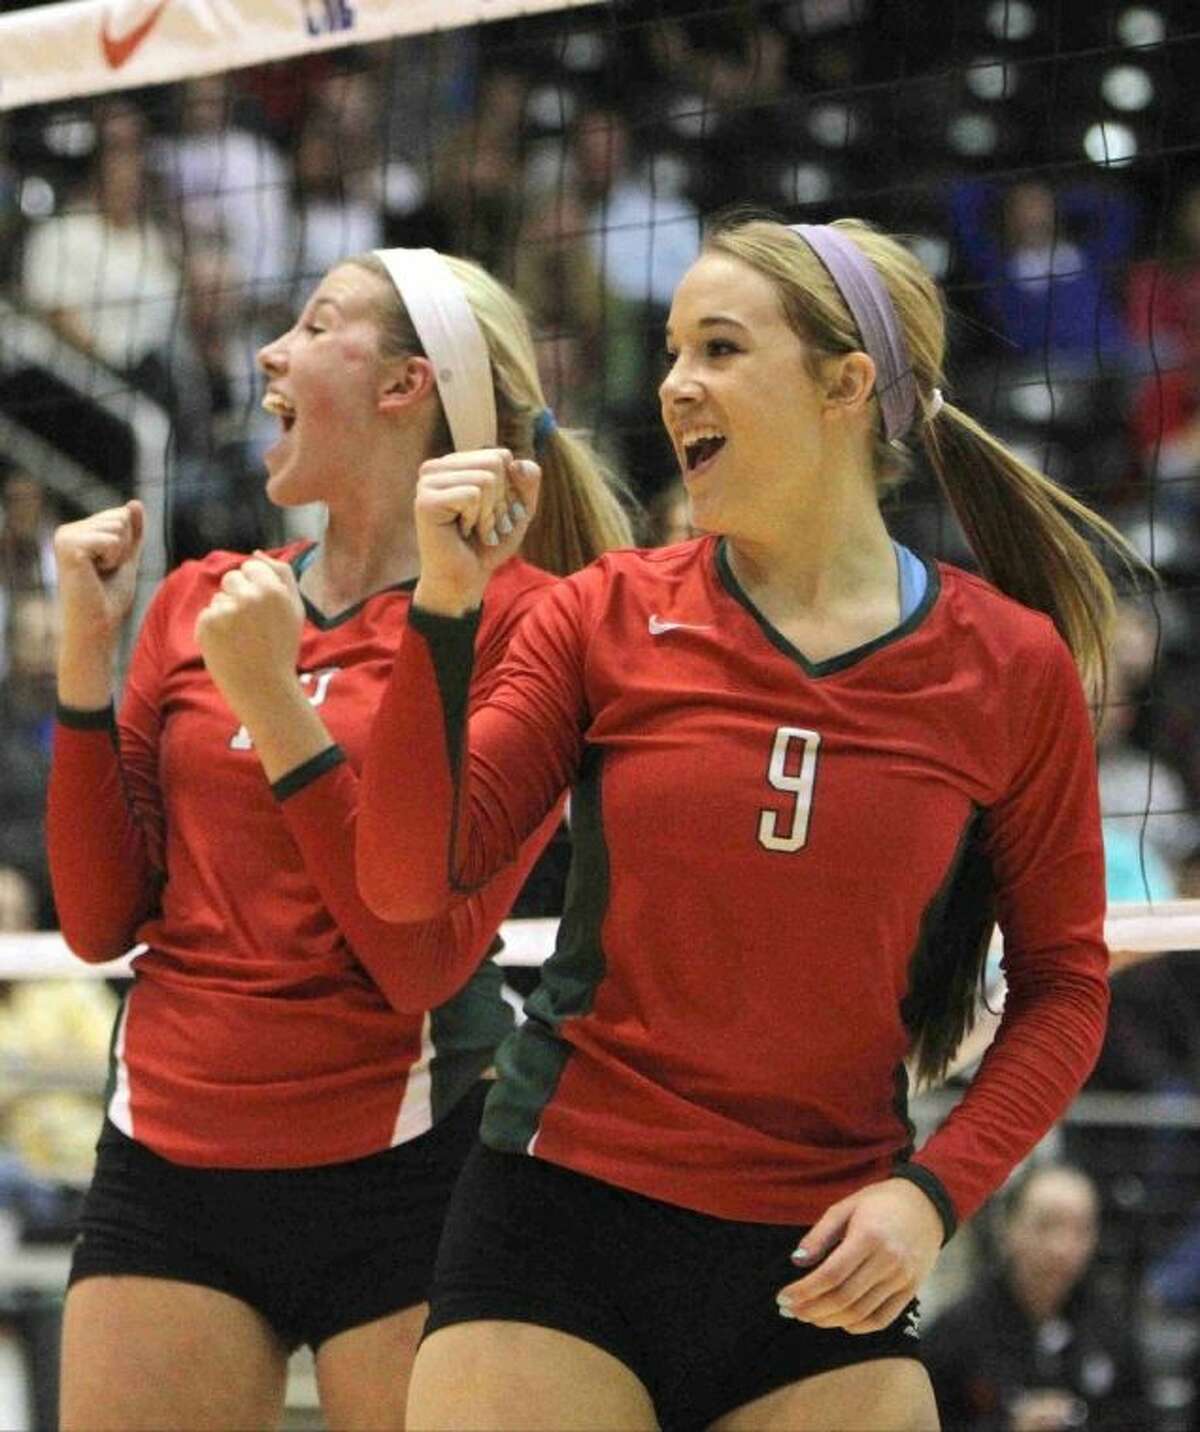 The Woodlands' Courtney Eckenrode (9) and Rachel Reed (12) celebrate a point during a Class 5A UIL Volleyball State Championship game Saturday, Nov. 23, 2013, in Garland, Texas. The Woodlands defeated San Antonio Churchill in straight sets to became the 18th undefeated volleyball state champion in UIL history since 1967. To purchase this photo and other like it, visit HCNPics.com.